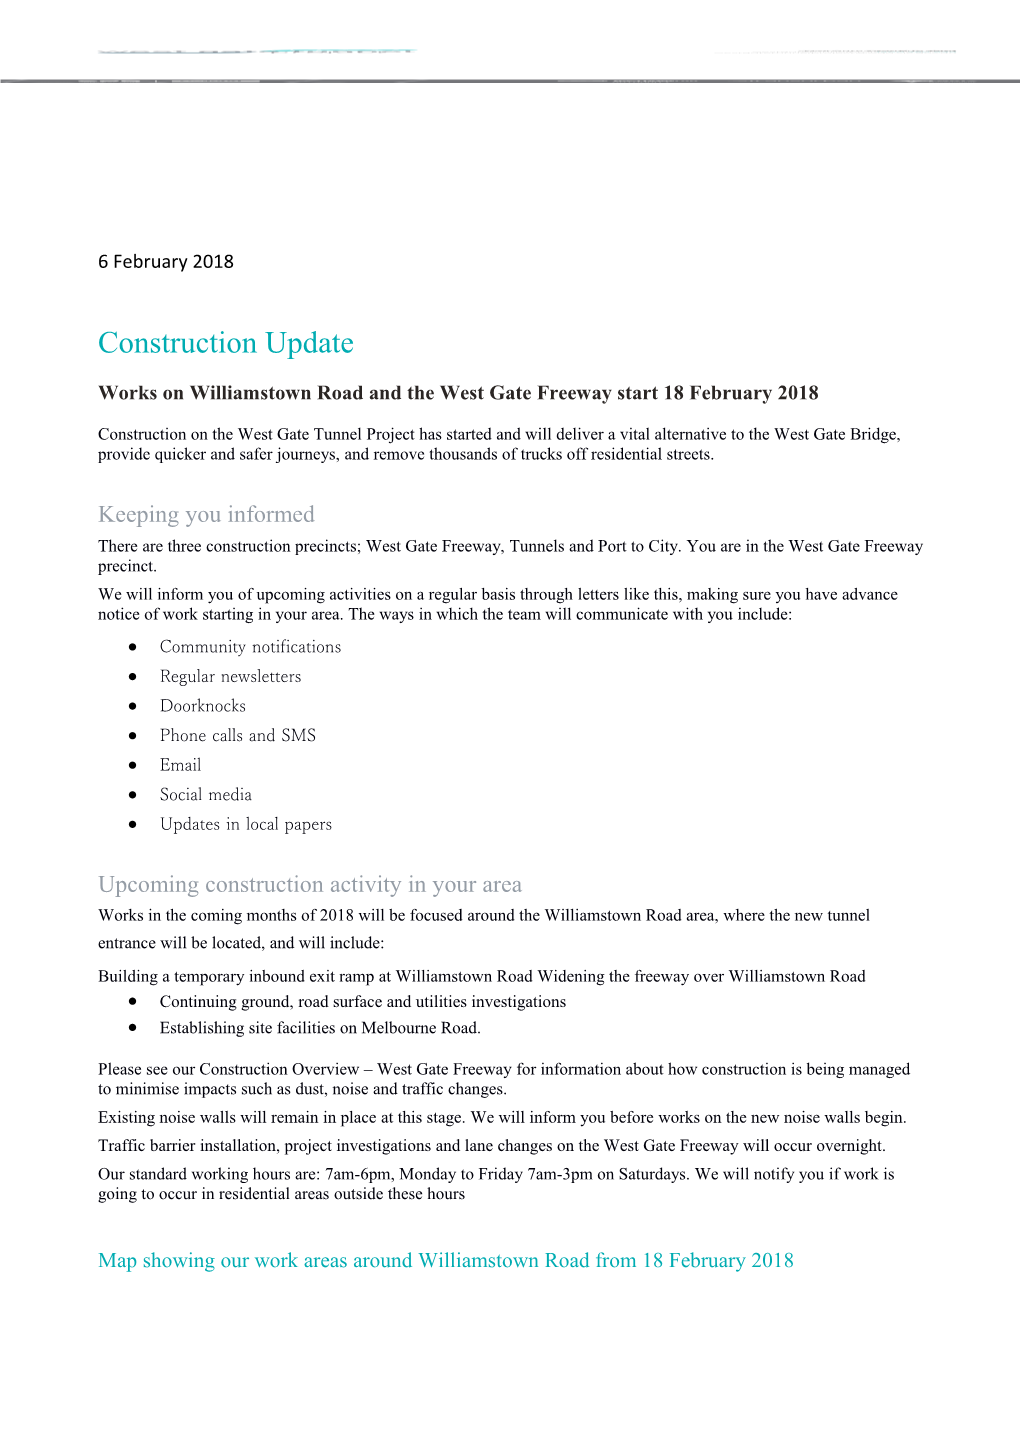 Works on Williamstown Road and the West Gate Freeway Start 18 February 2018